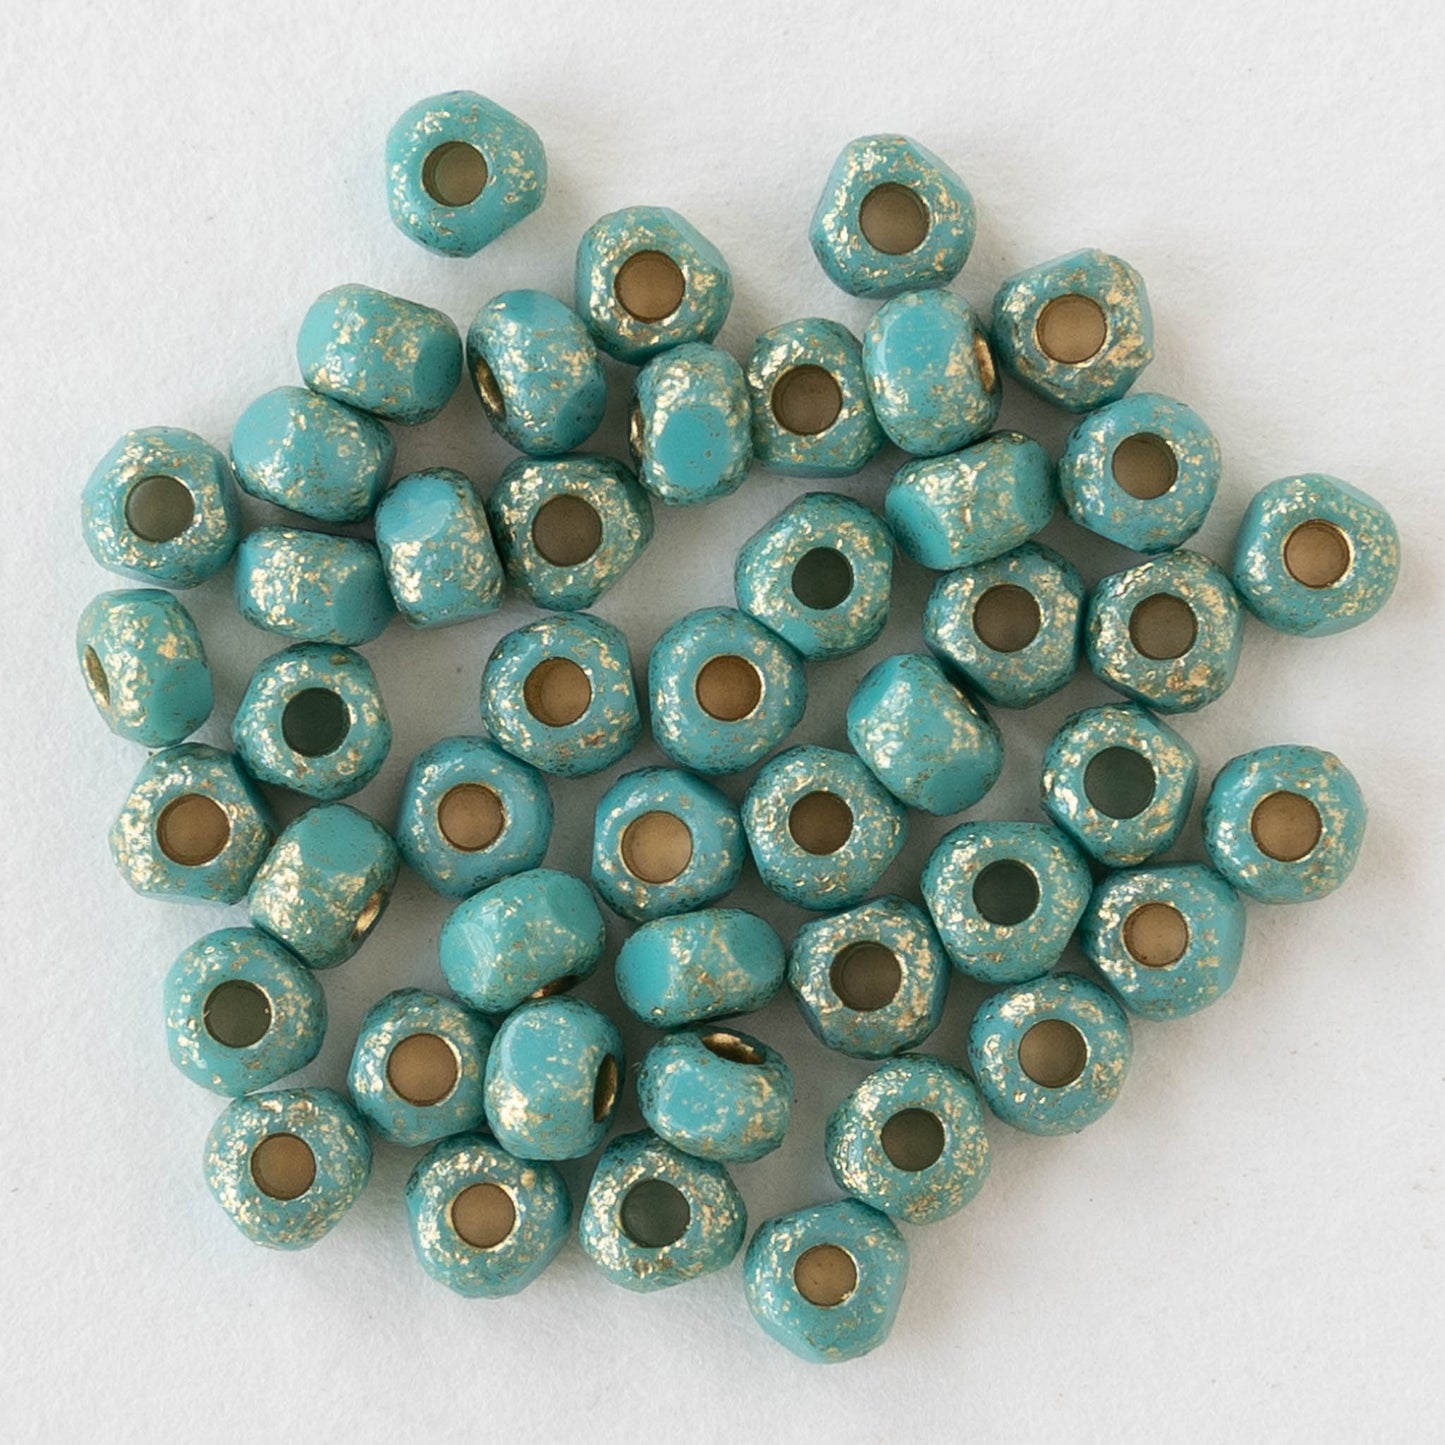 6/0 Tri-cut Seed Beads - Opaque Turquoise with Gold Dust - 50